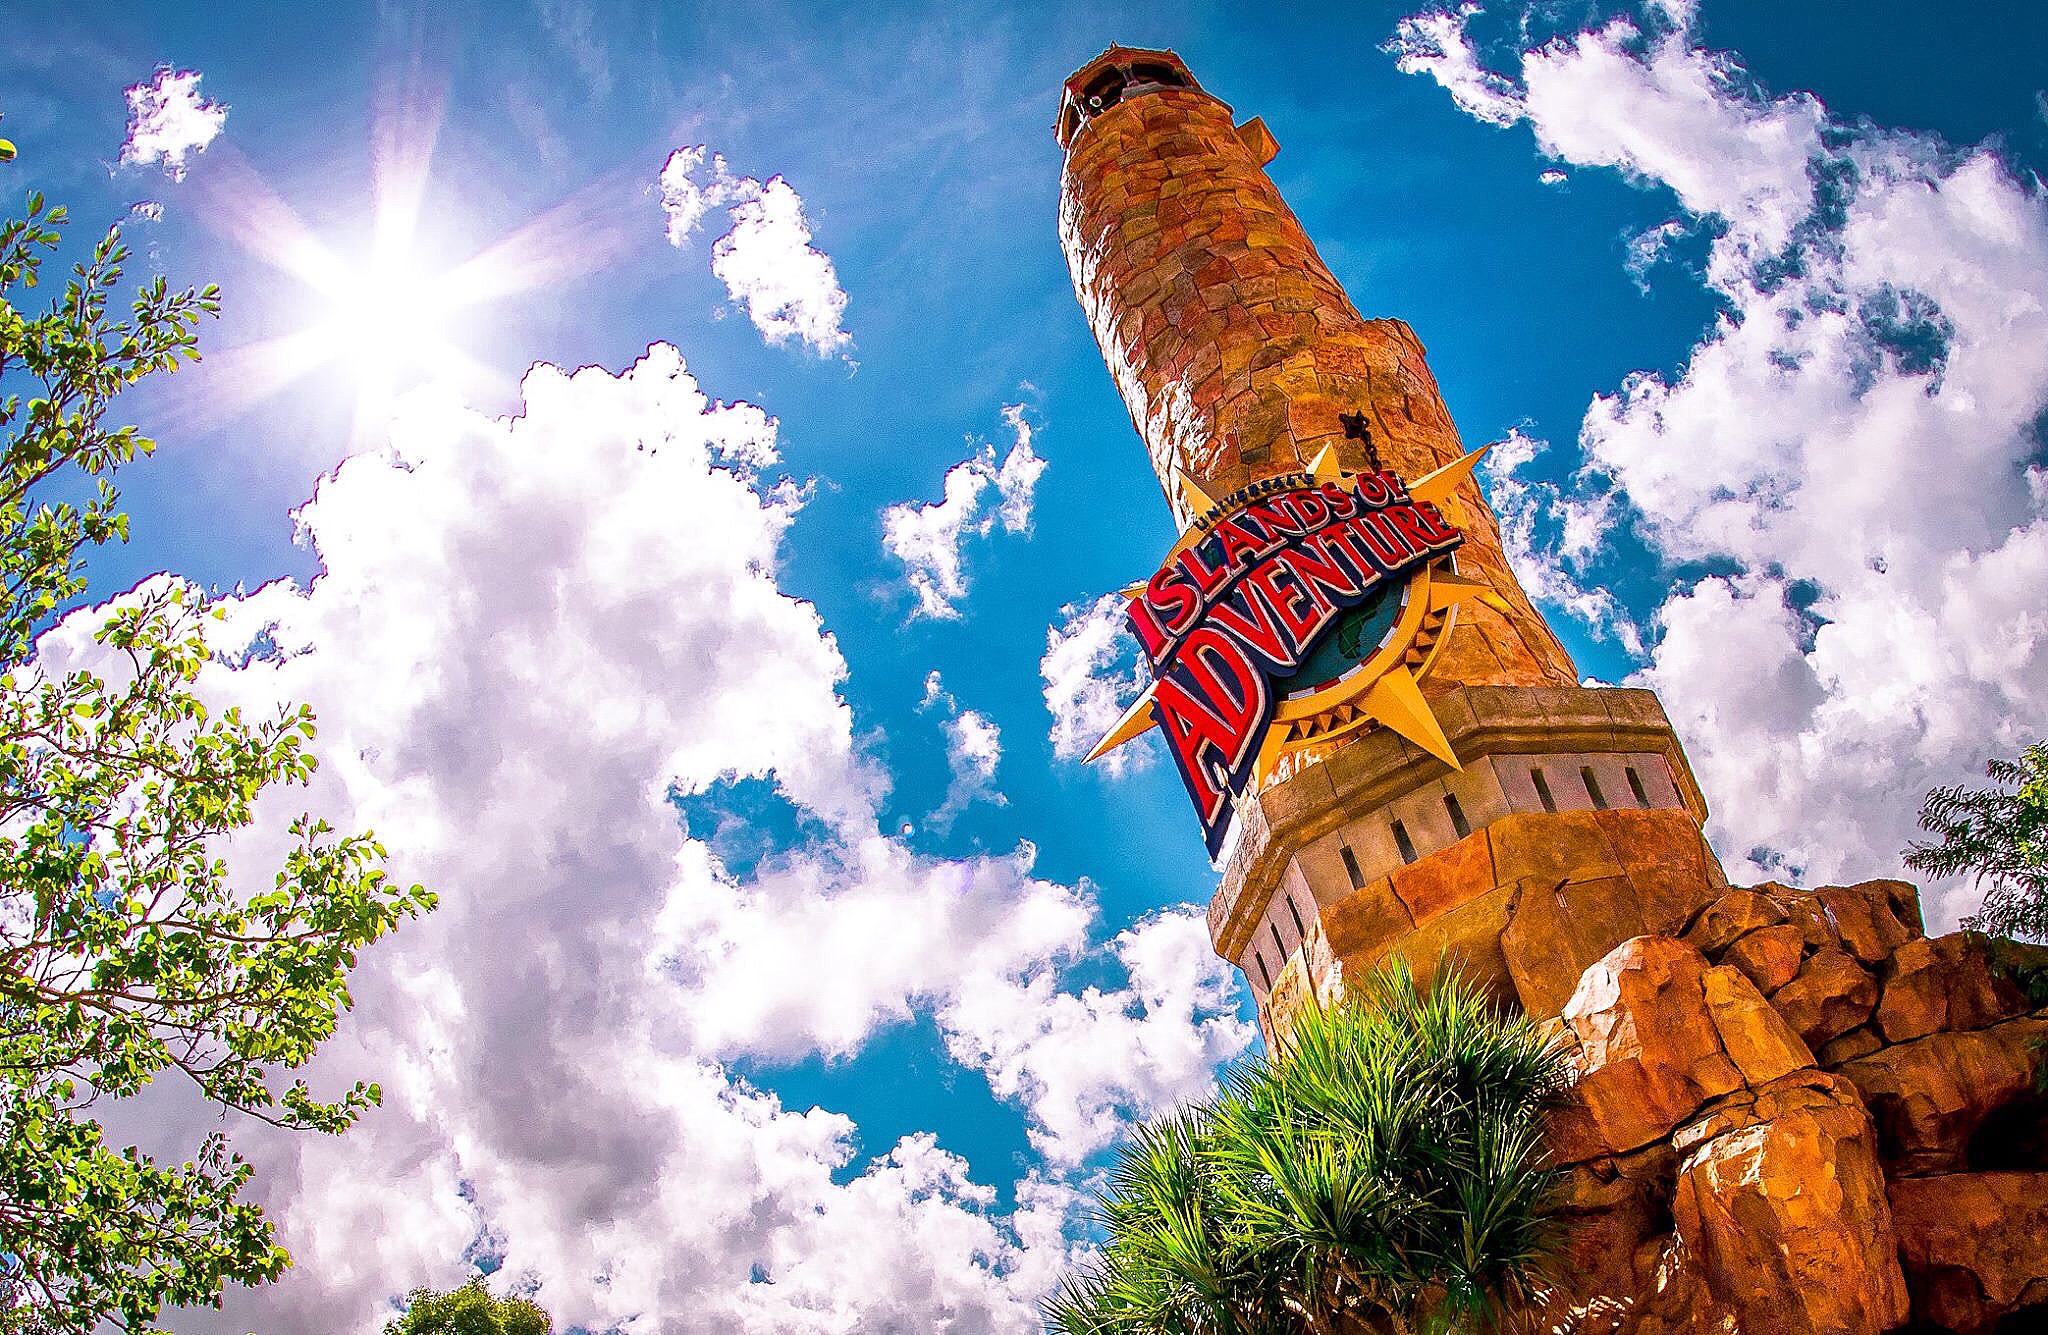 Experience Meetings & Events at Universal's Islands of Adventure